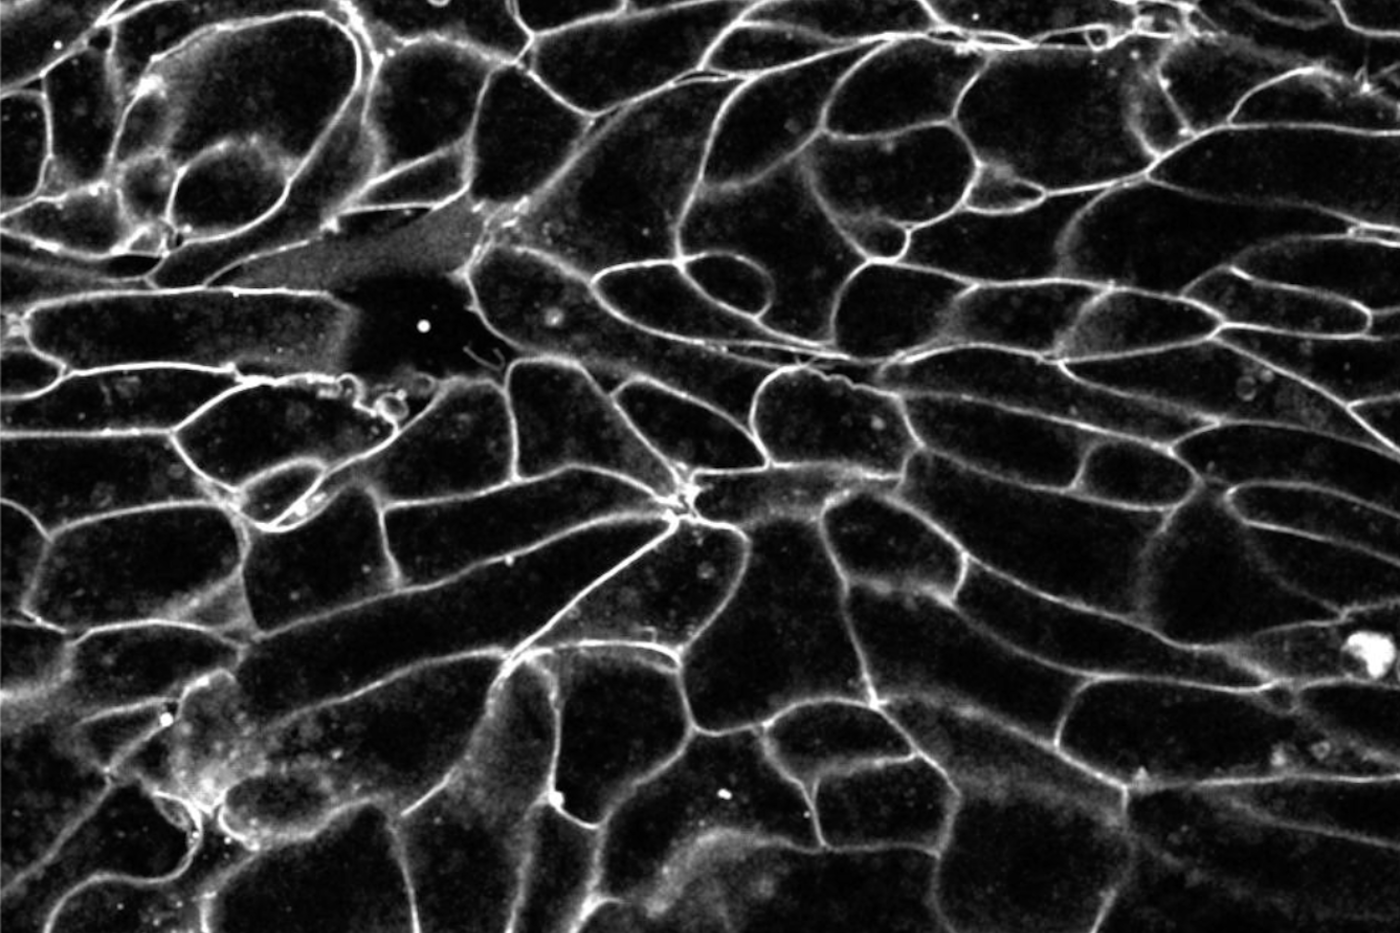 Black and white image of cells in a developing embyo